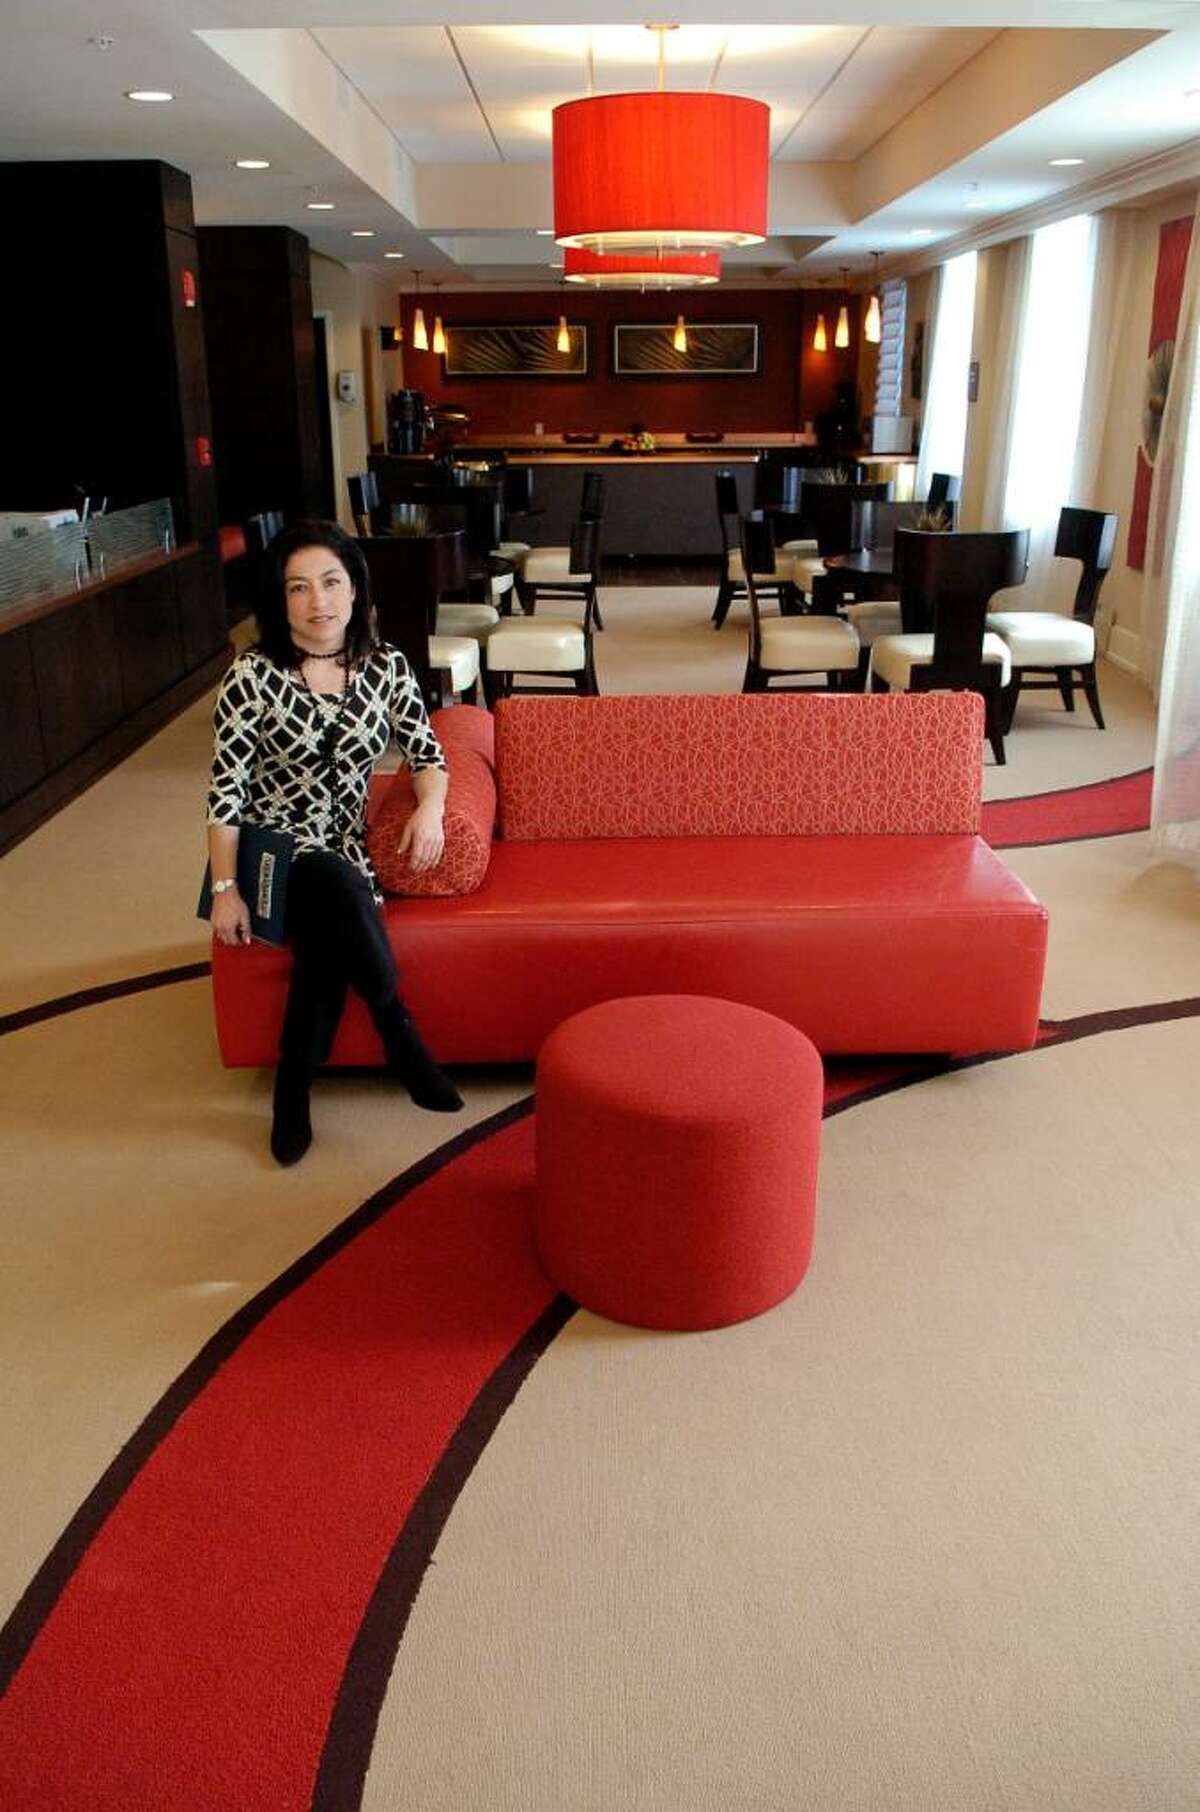 Mia Schipani, director of business development at Hotel Zero Degrees in Stamford, Conn., sits in the lobby of the hotel on Thursday February 18, 2010.